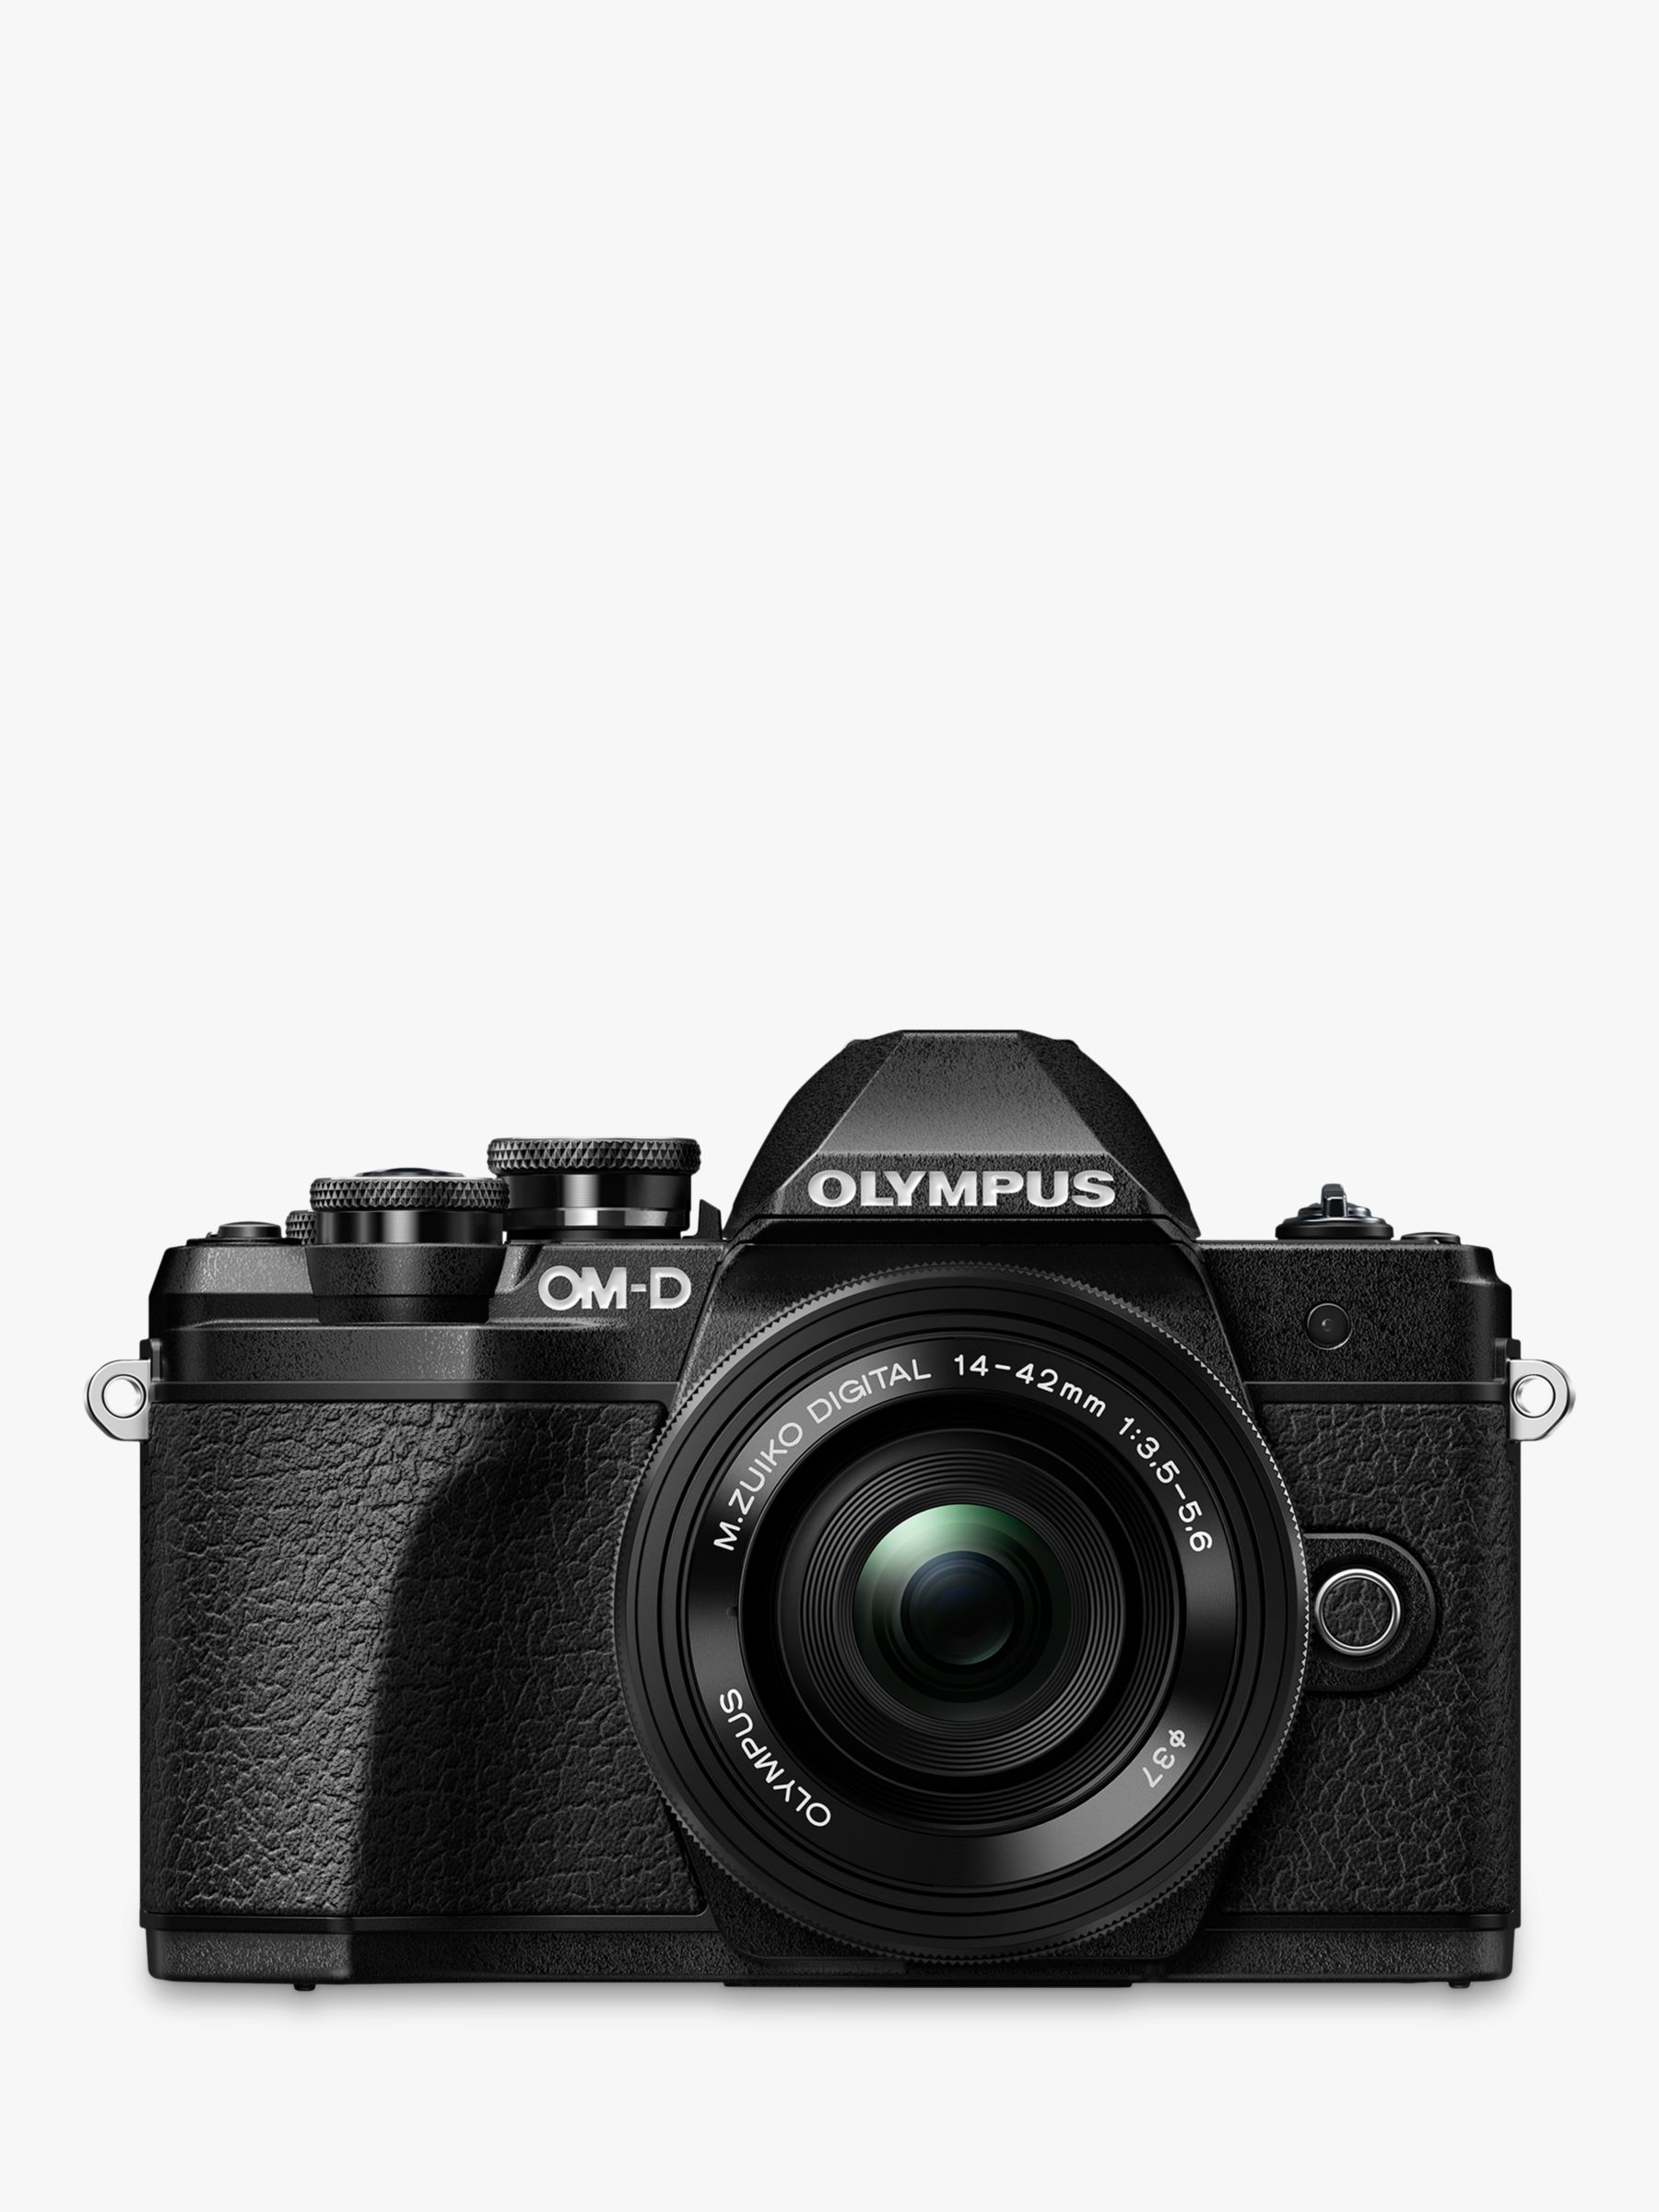 Olympus OM-D E-M10 Mark III Compact System Camera with 14-42mm EZ Lens, 4K Ultra HD, 16.1MP, Wi-Fi, EVF, 3” LCD Tiltable Touch Screen